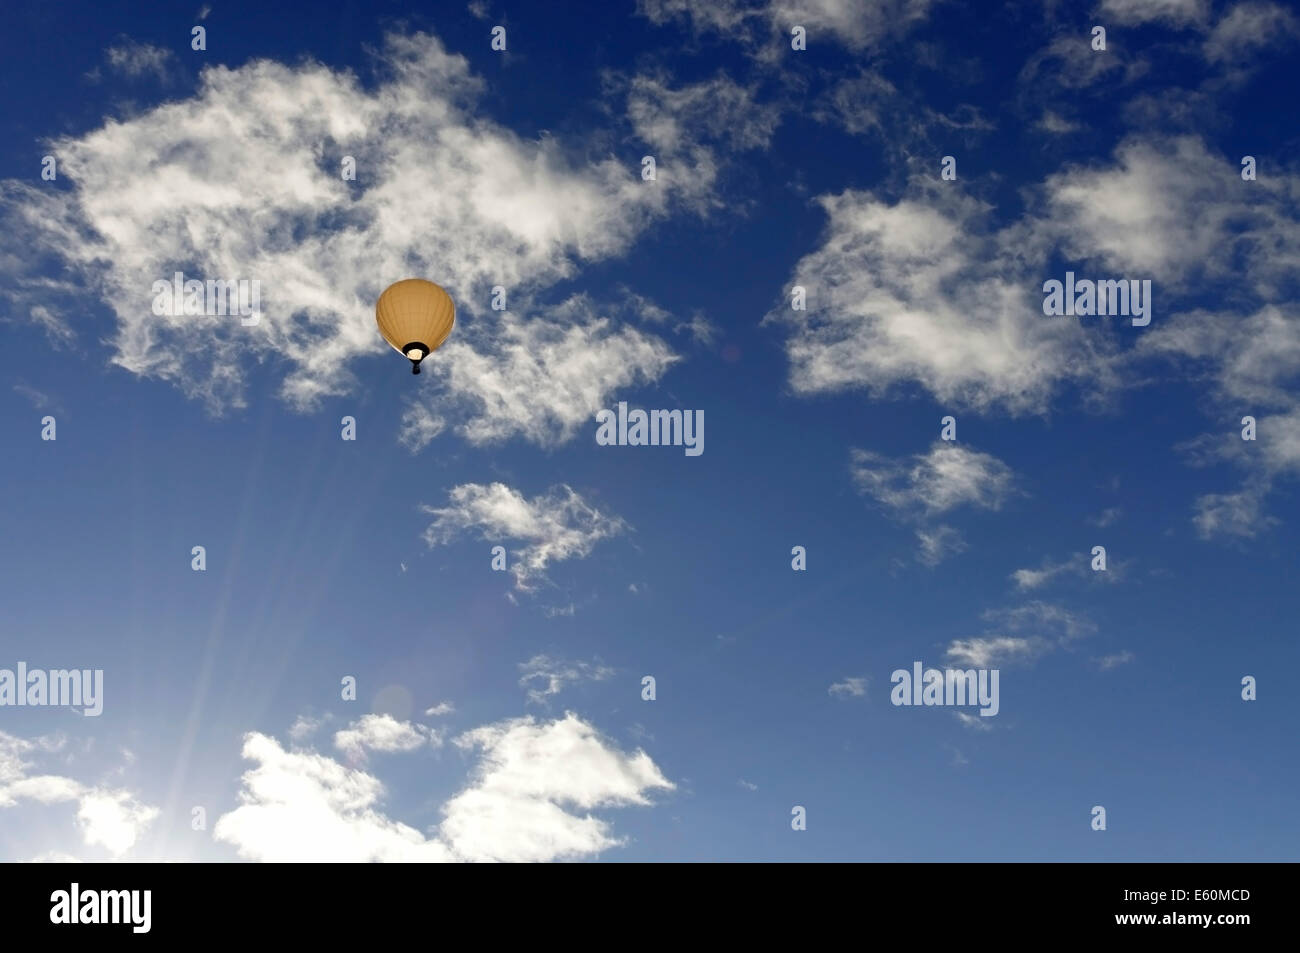 bright hot air balloon high in the sky with a blue sky and clouds Stock Photo